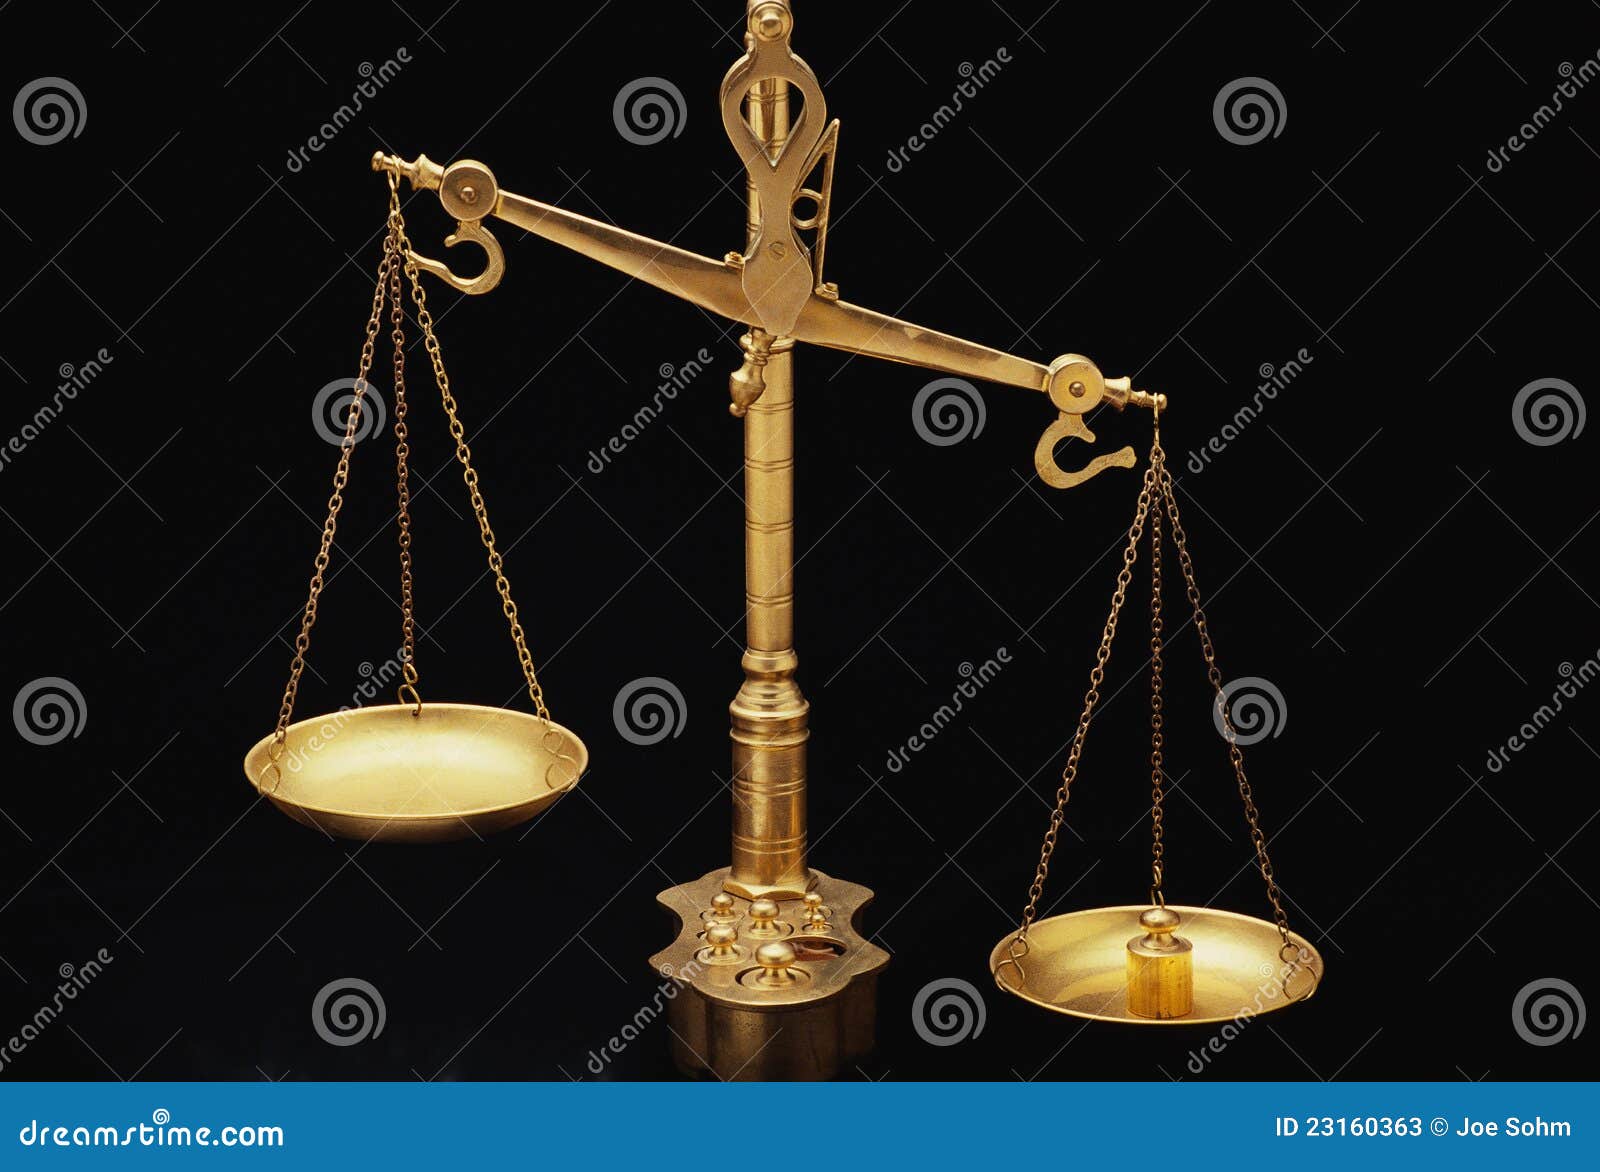 golden scales of justice